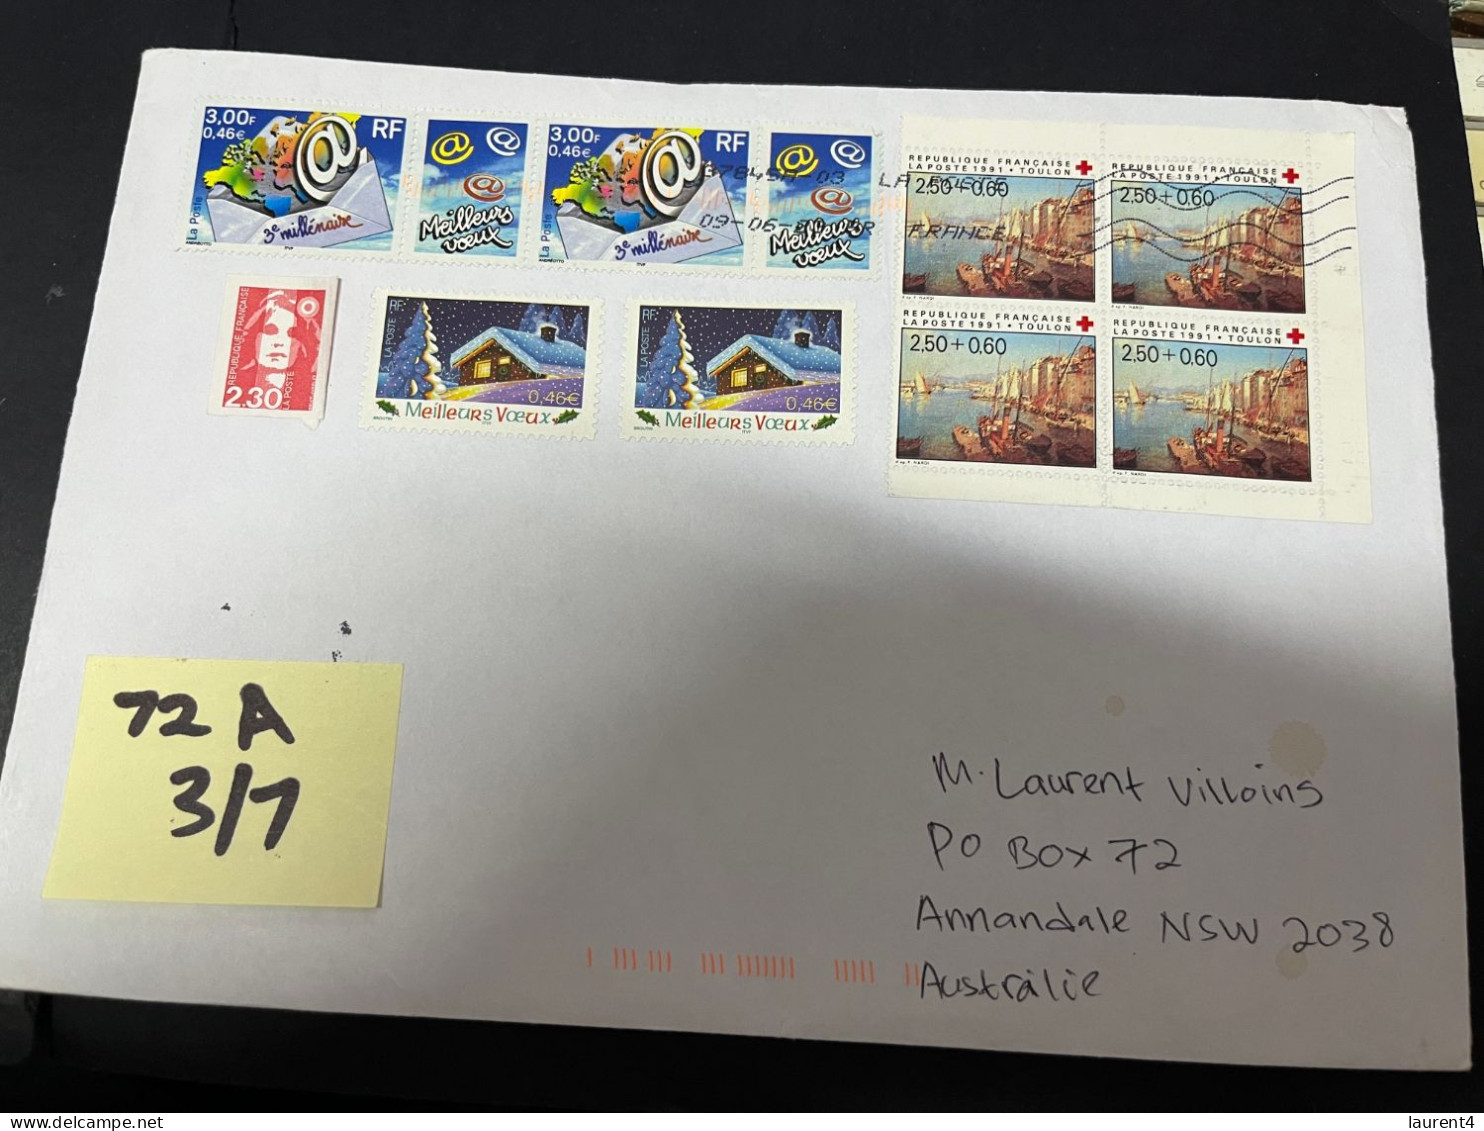 30-4-2023 (3 Z 27) Letter Posted From France To Australia In 2024 (2 Covers)  23 X 16cm (with Many Stamps) - Covers & Documents